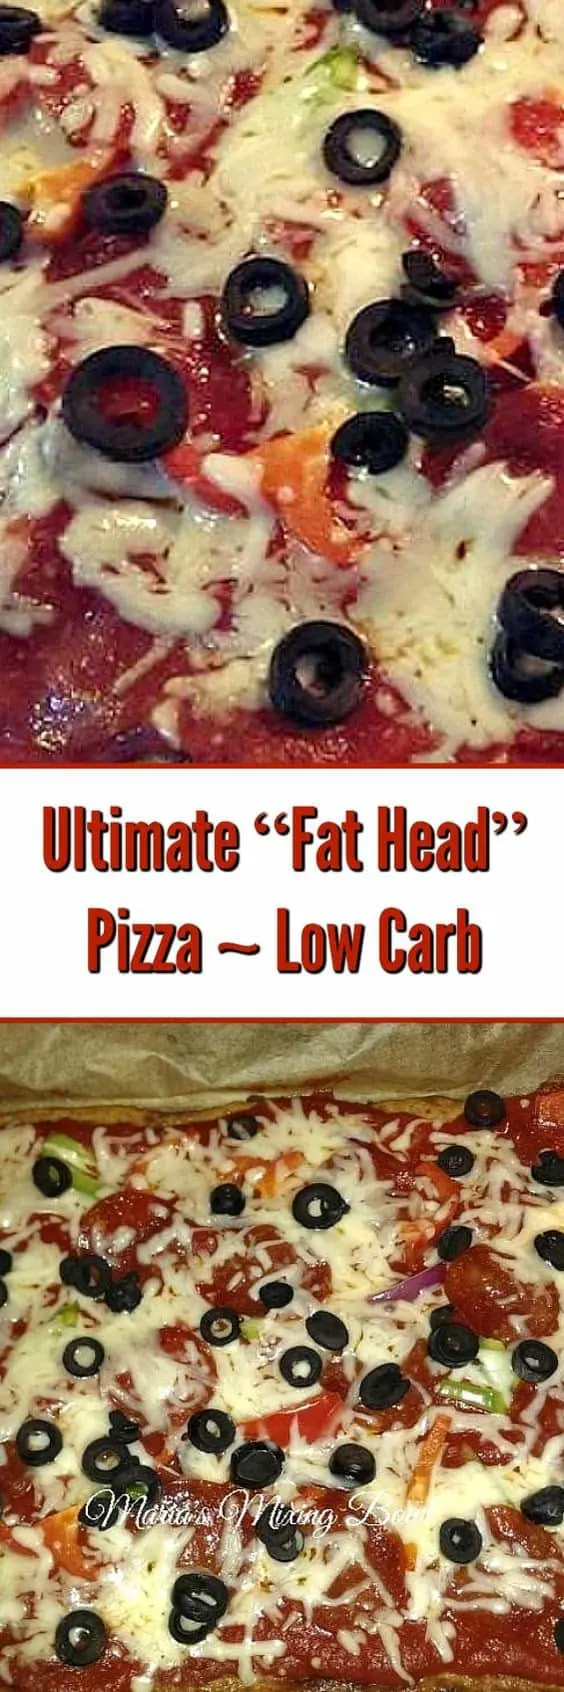 The ultimate “Fat Head” Pizza ~ Low Carb-You don’t have to go without pizza just because you are eating low carb or grain-free! via @Mooreorlesscook